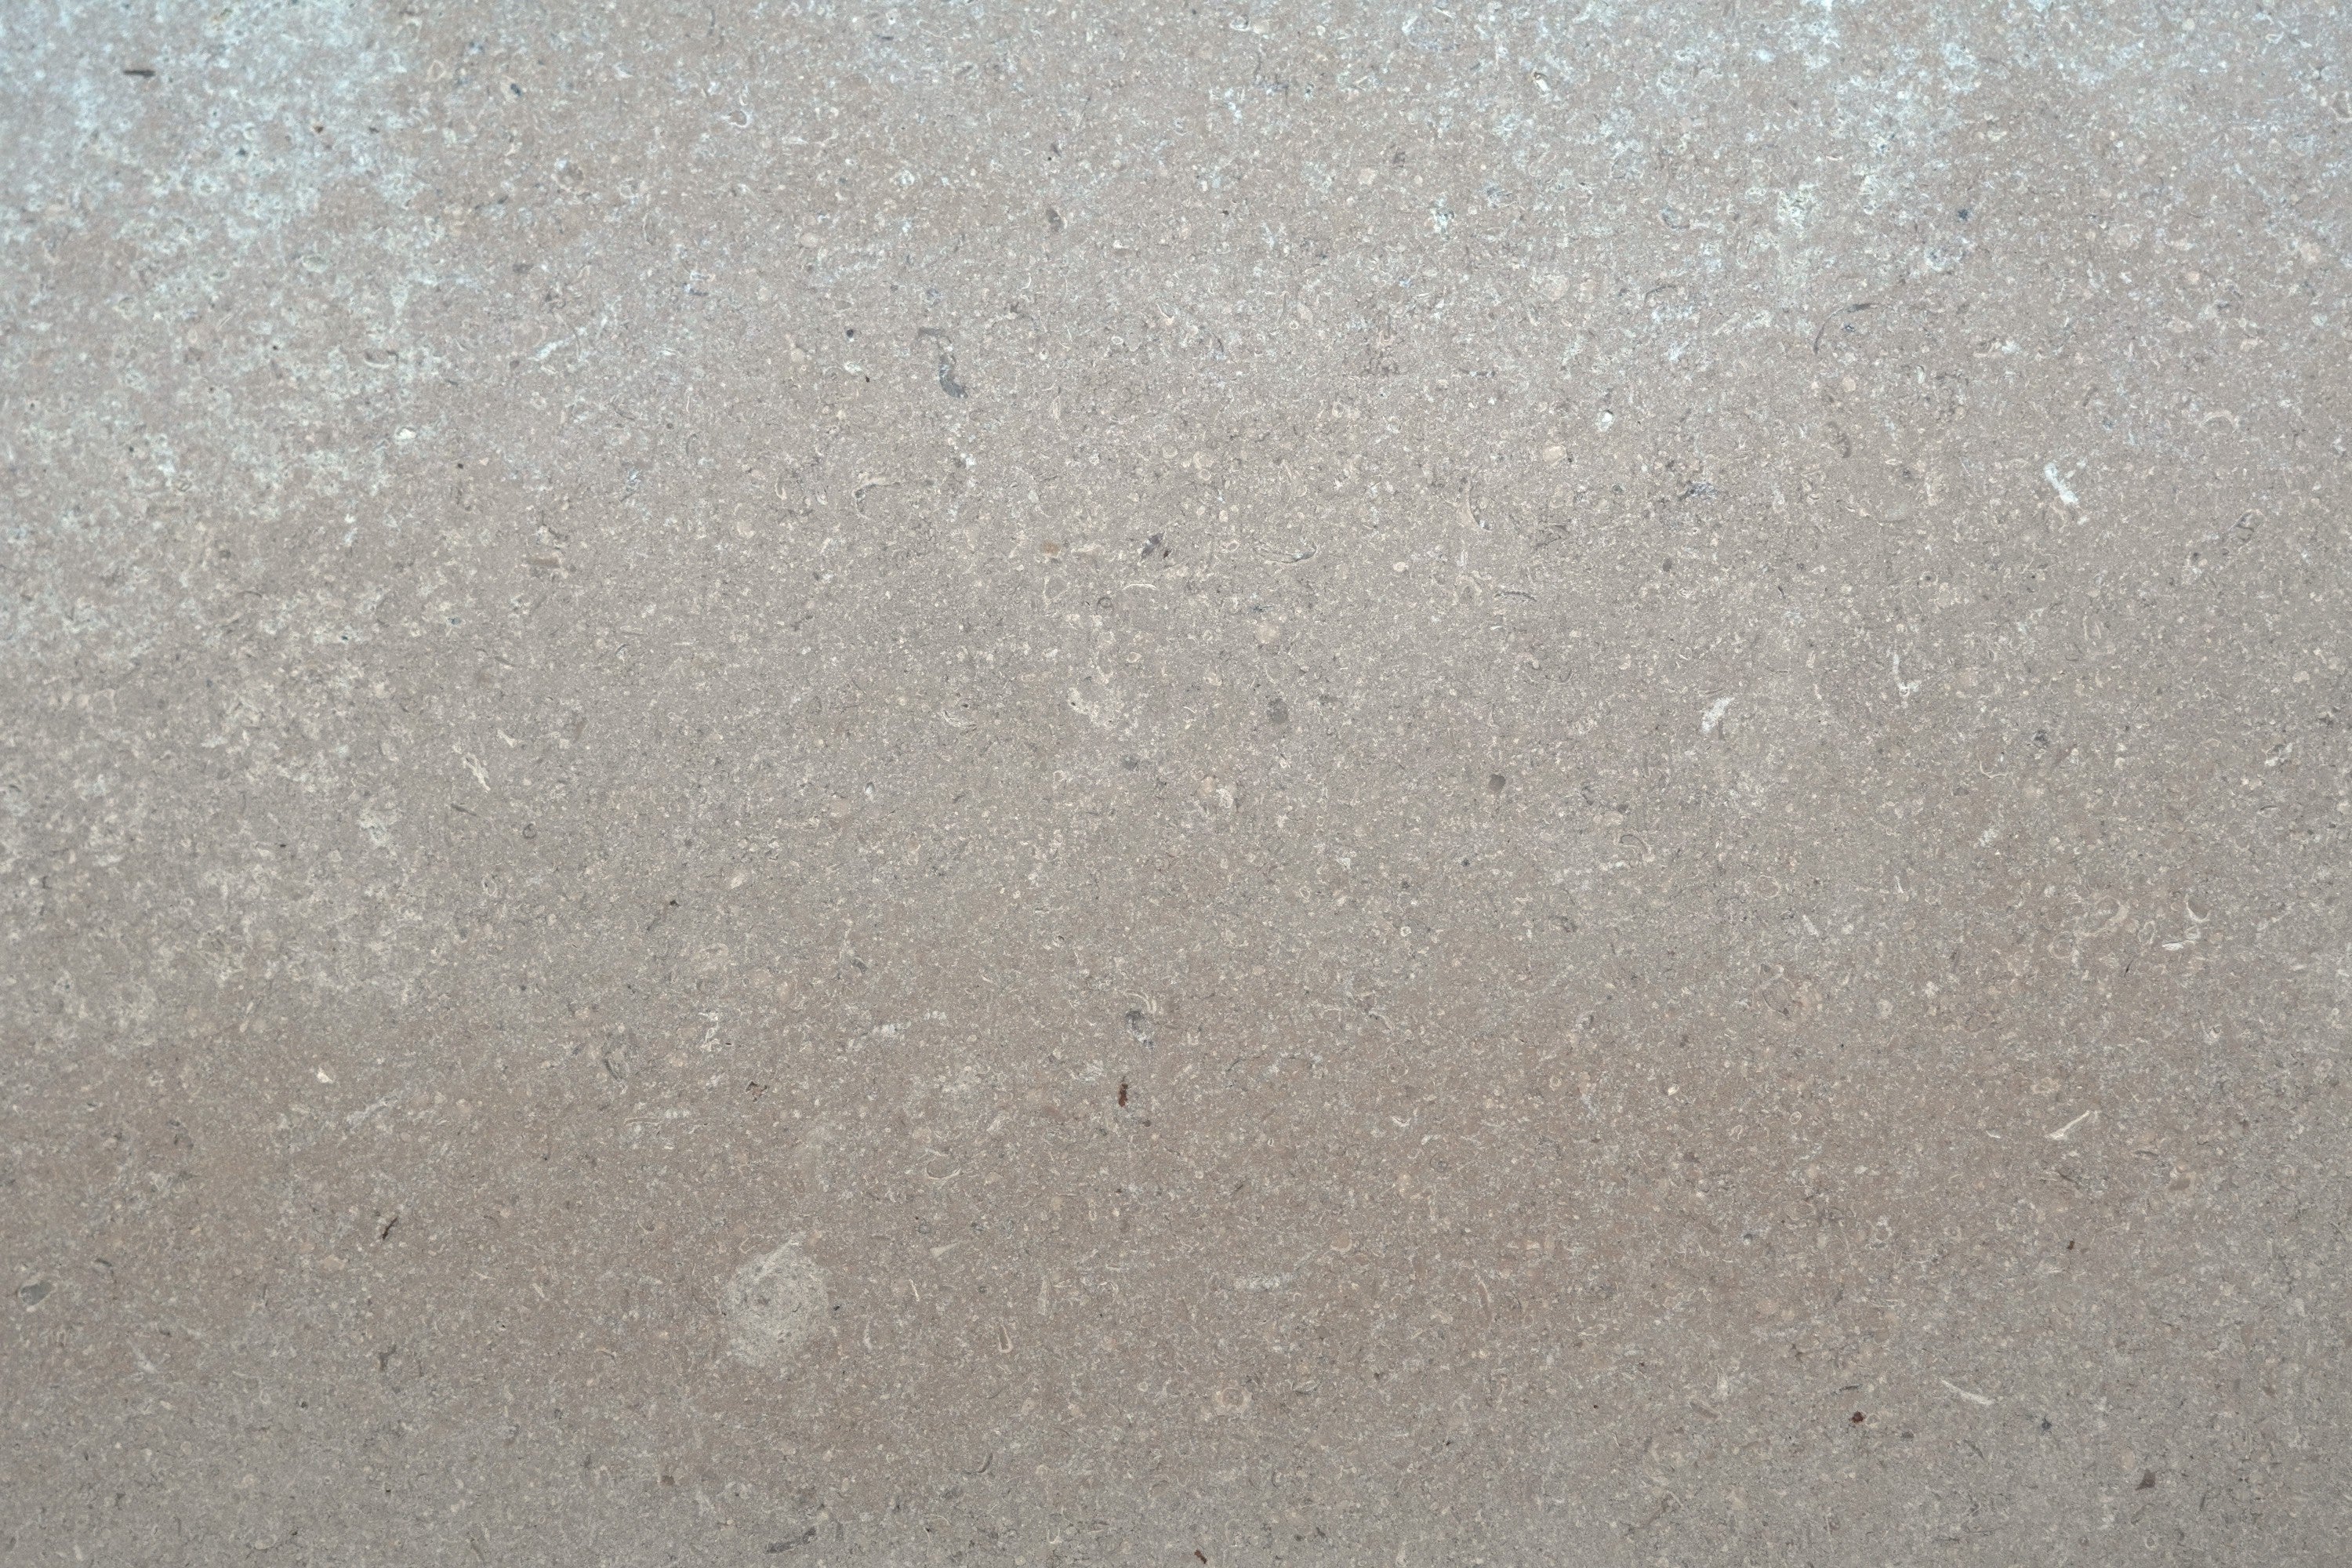 beige tumbled natural limestone field tile champagne taupe width of 16 length of 16 and thickness of 0.625 sold to you by surface group international